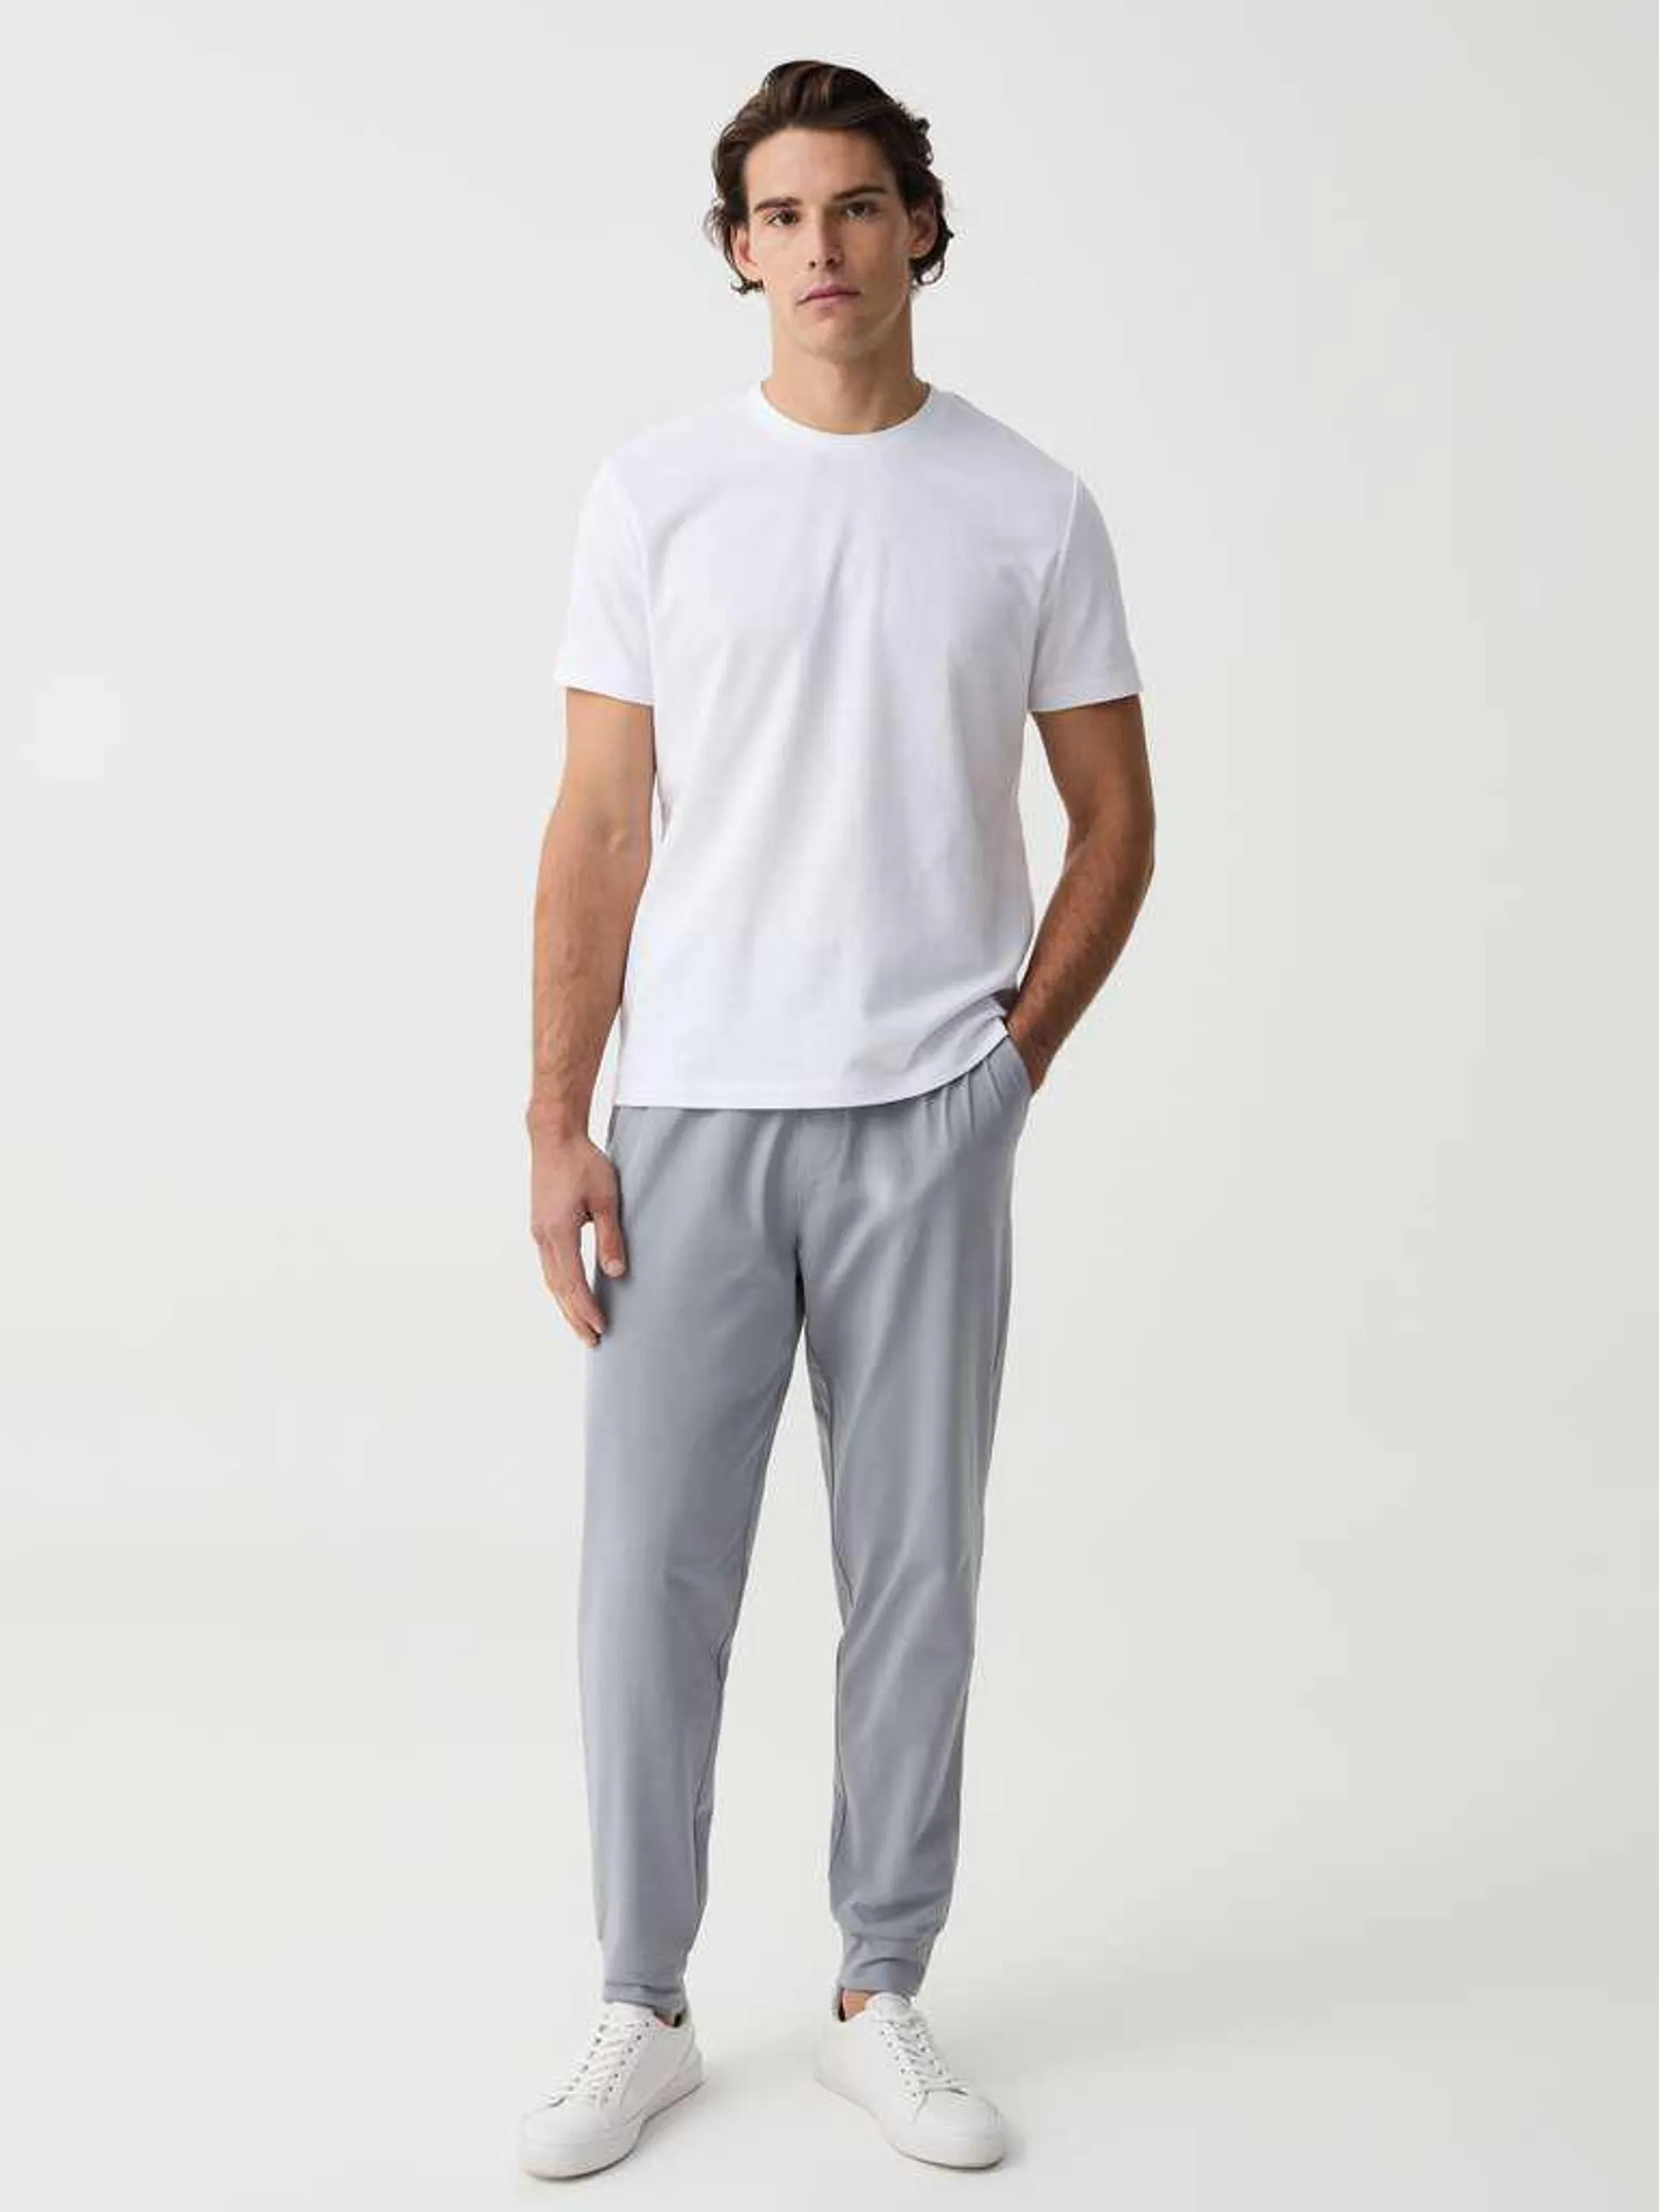 Light Grey Solid colour joggers